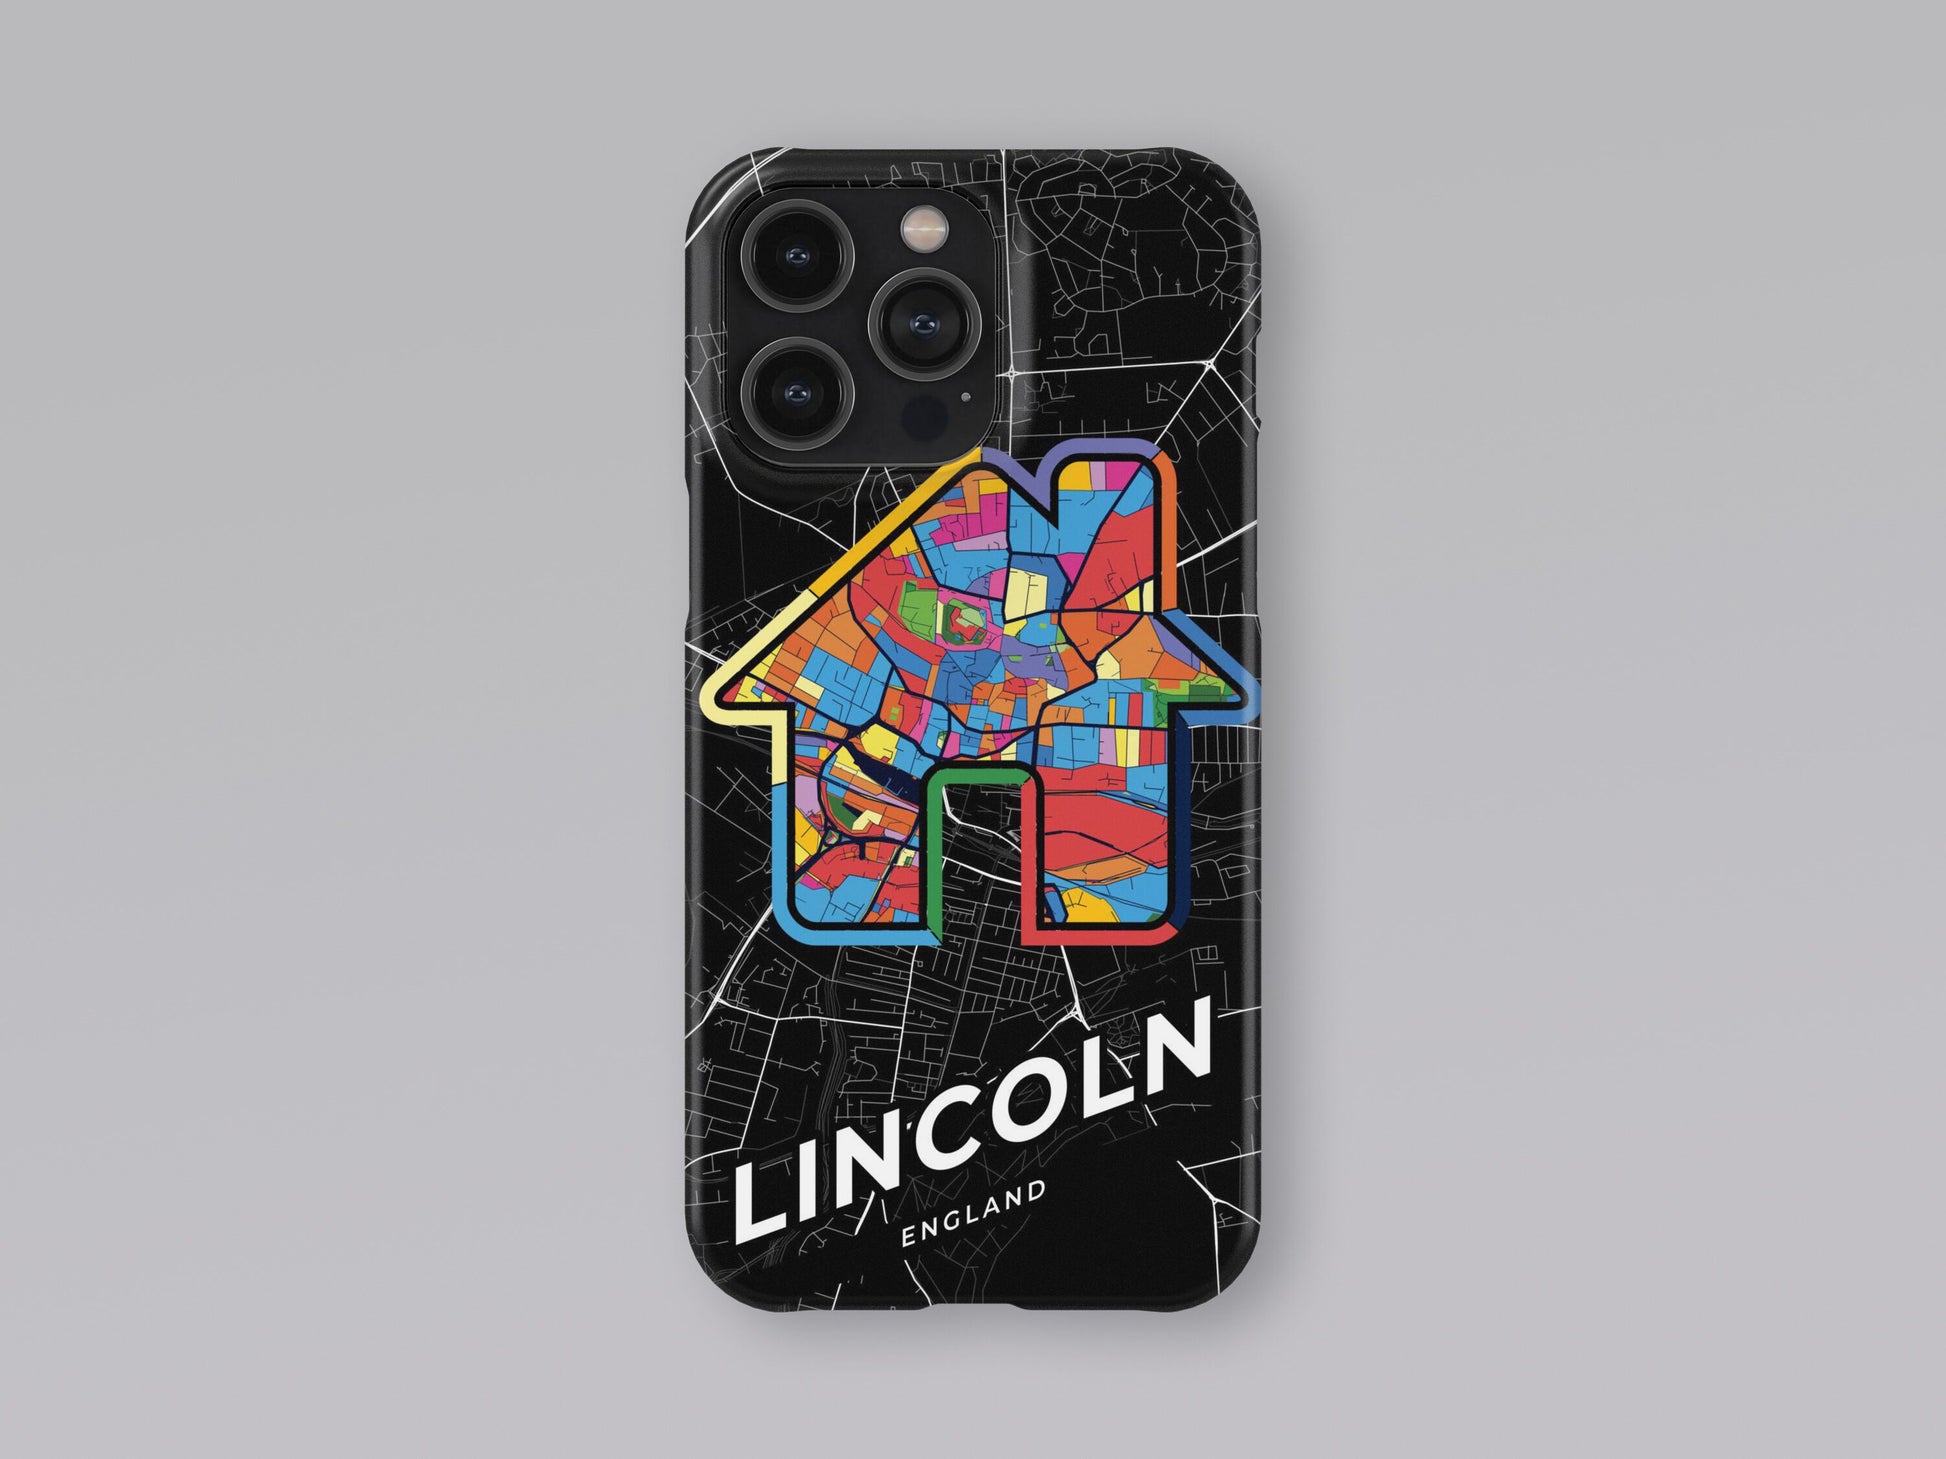 Lincoln England slim phone case with colorful icon. Birthday, wedding or housewarming gift. Couple match cases. 3